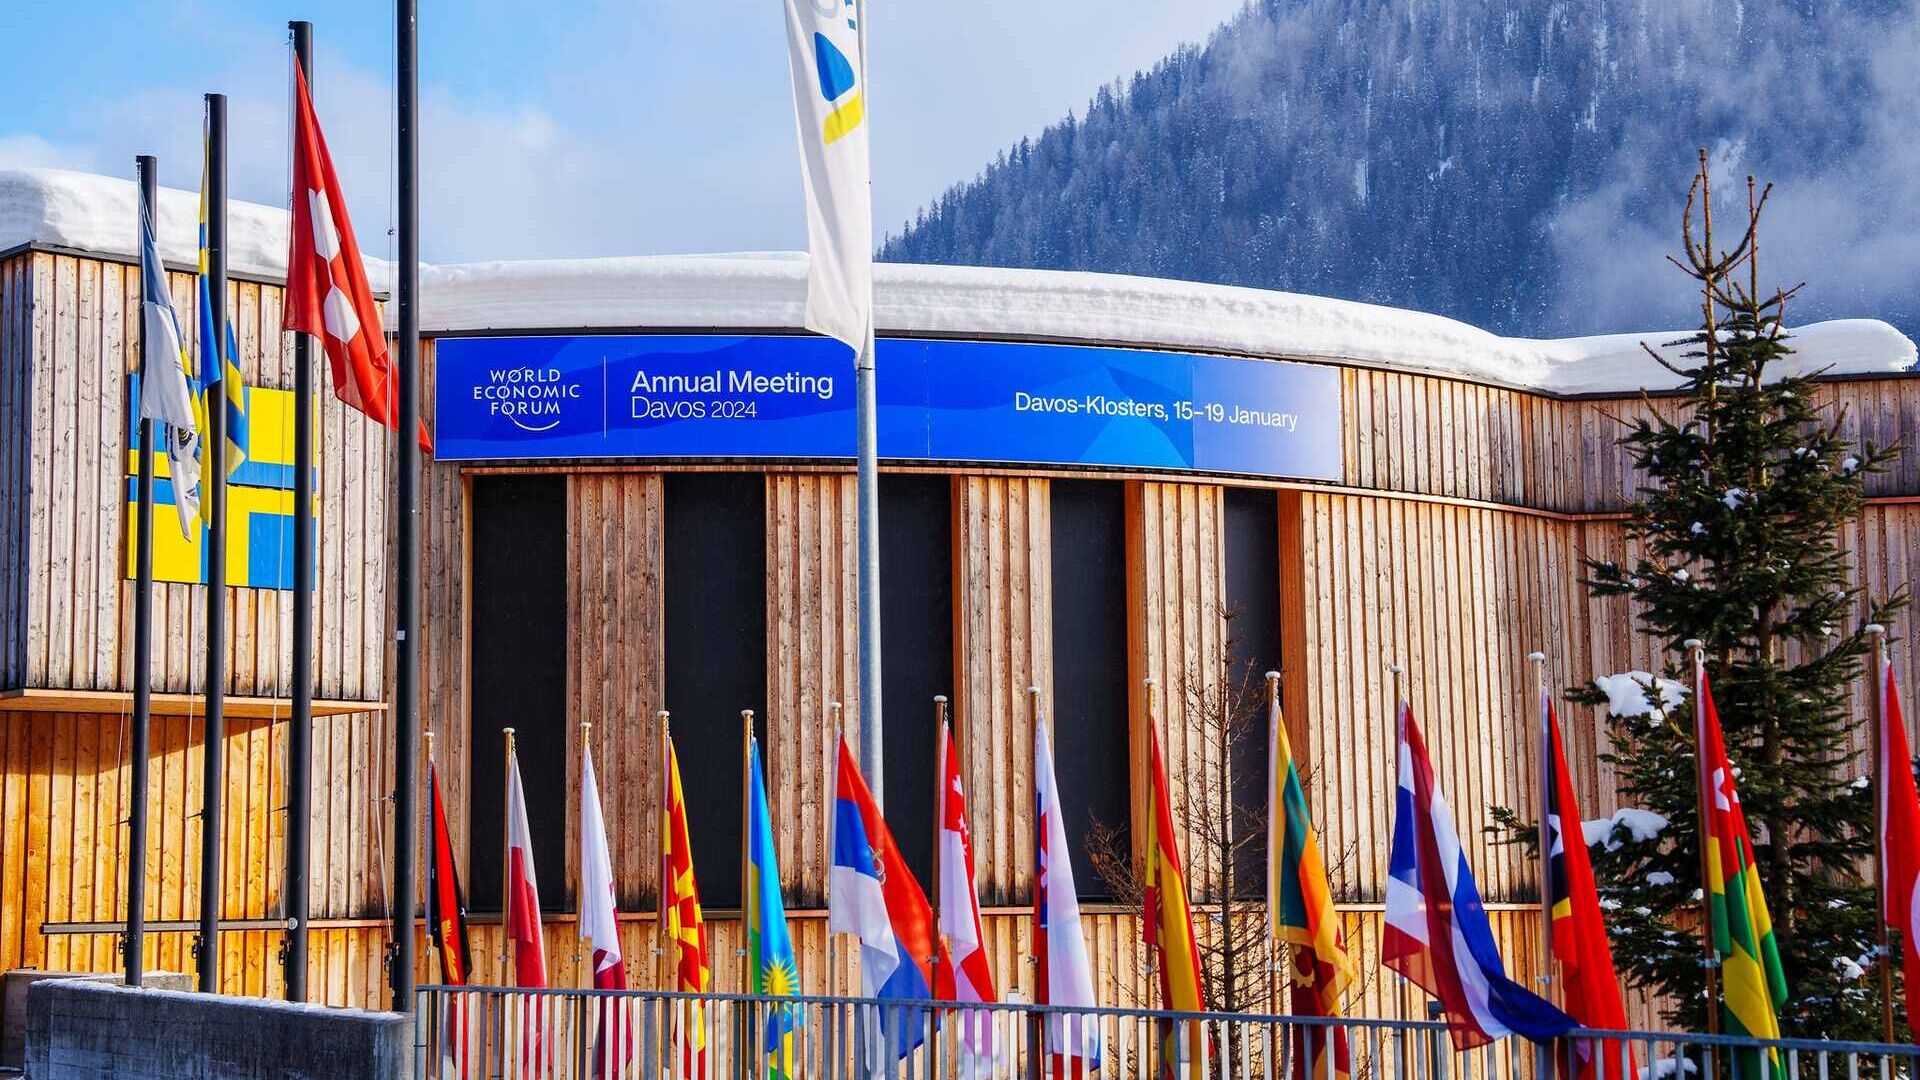 International Computation and AI Network: the main venue of the 2024 edition of the World Economic Forum in Davos (Canton of Grisons) (Photo: Jakob Polacsek/World Economic Forum)